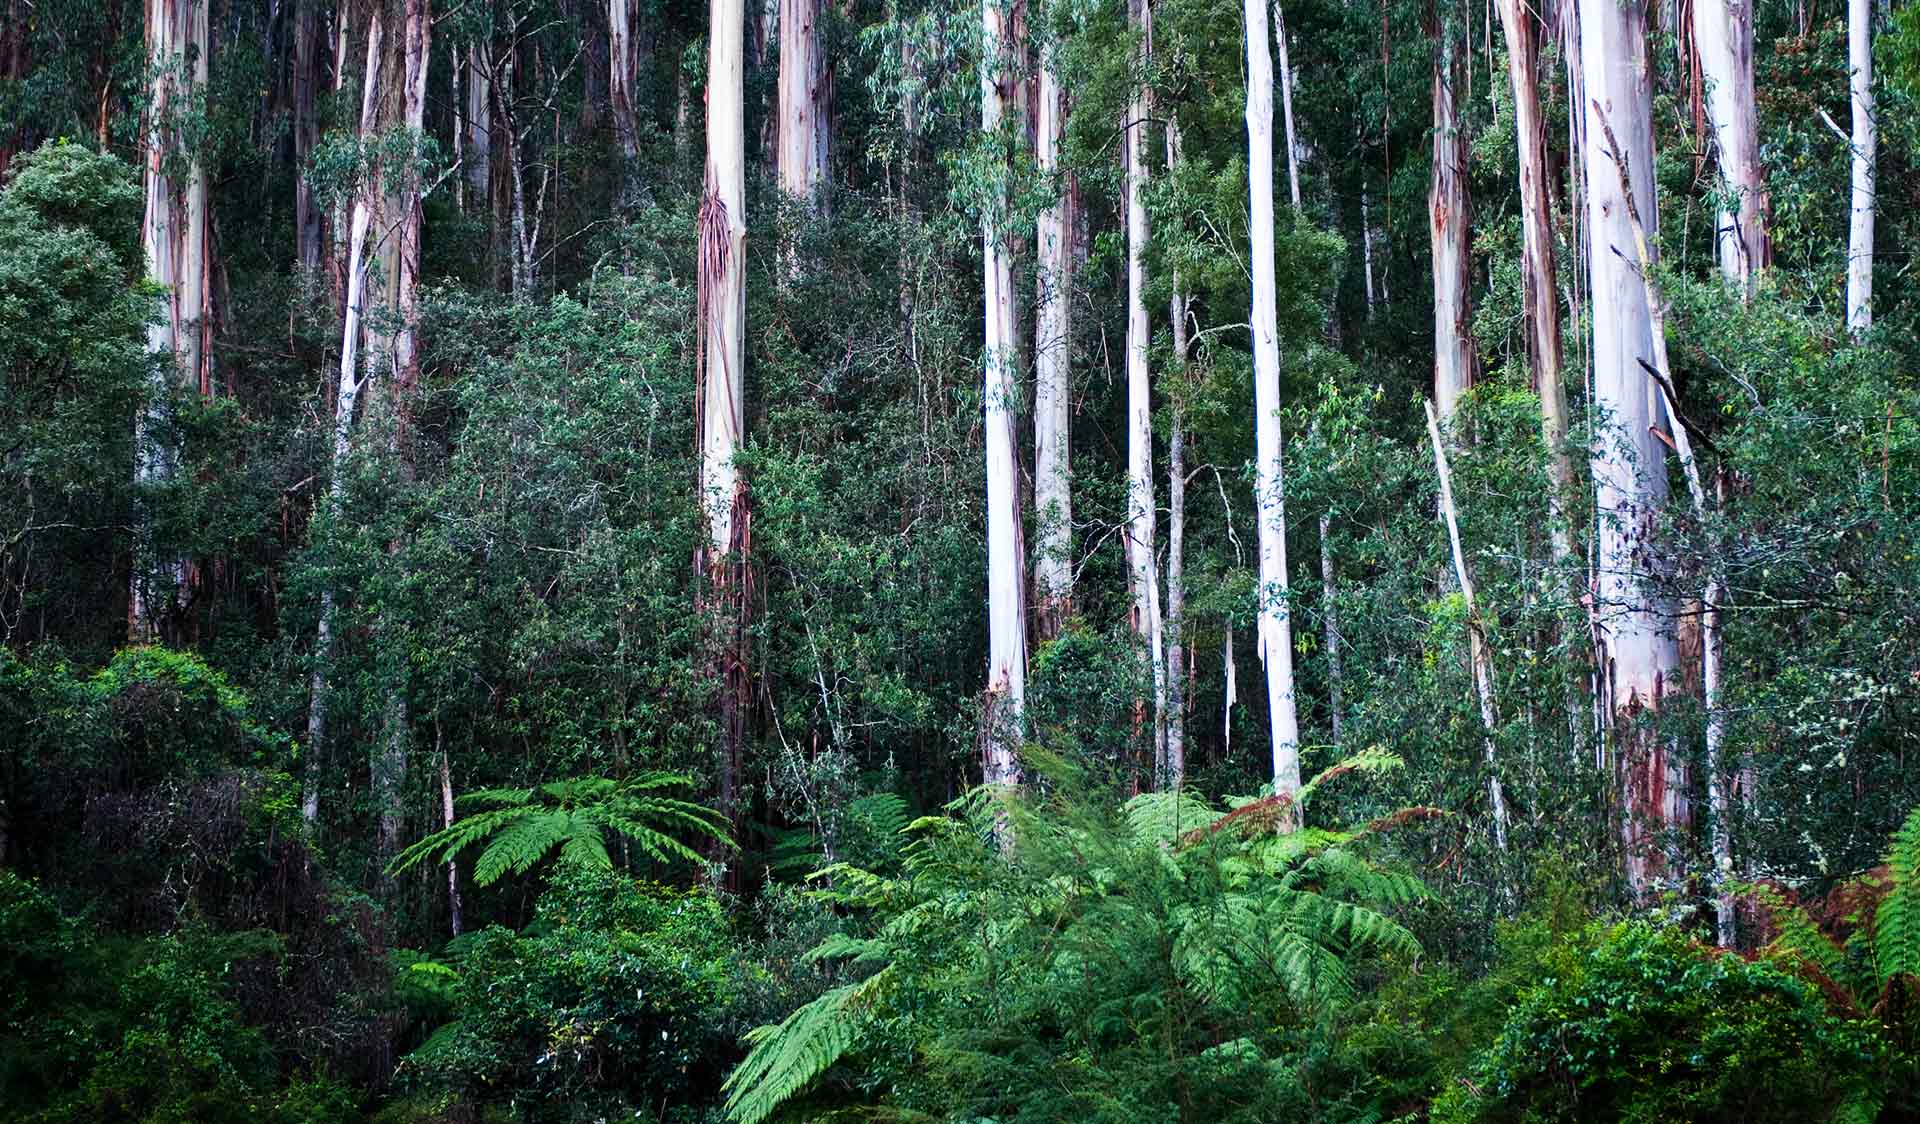 Mountain Ash and ferns create a spectacular backdrop for a picnic in the Yarra Ranges National Park.